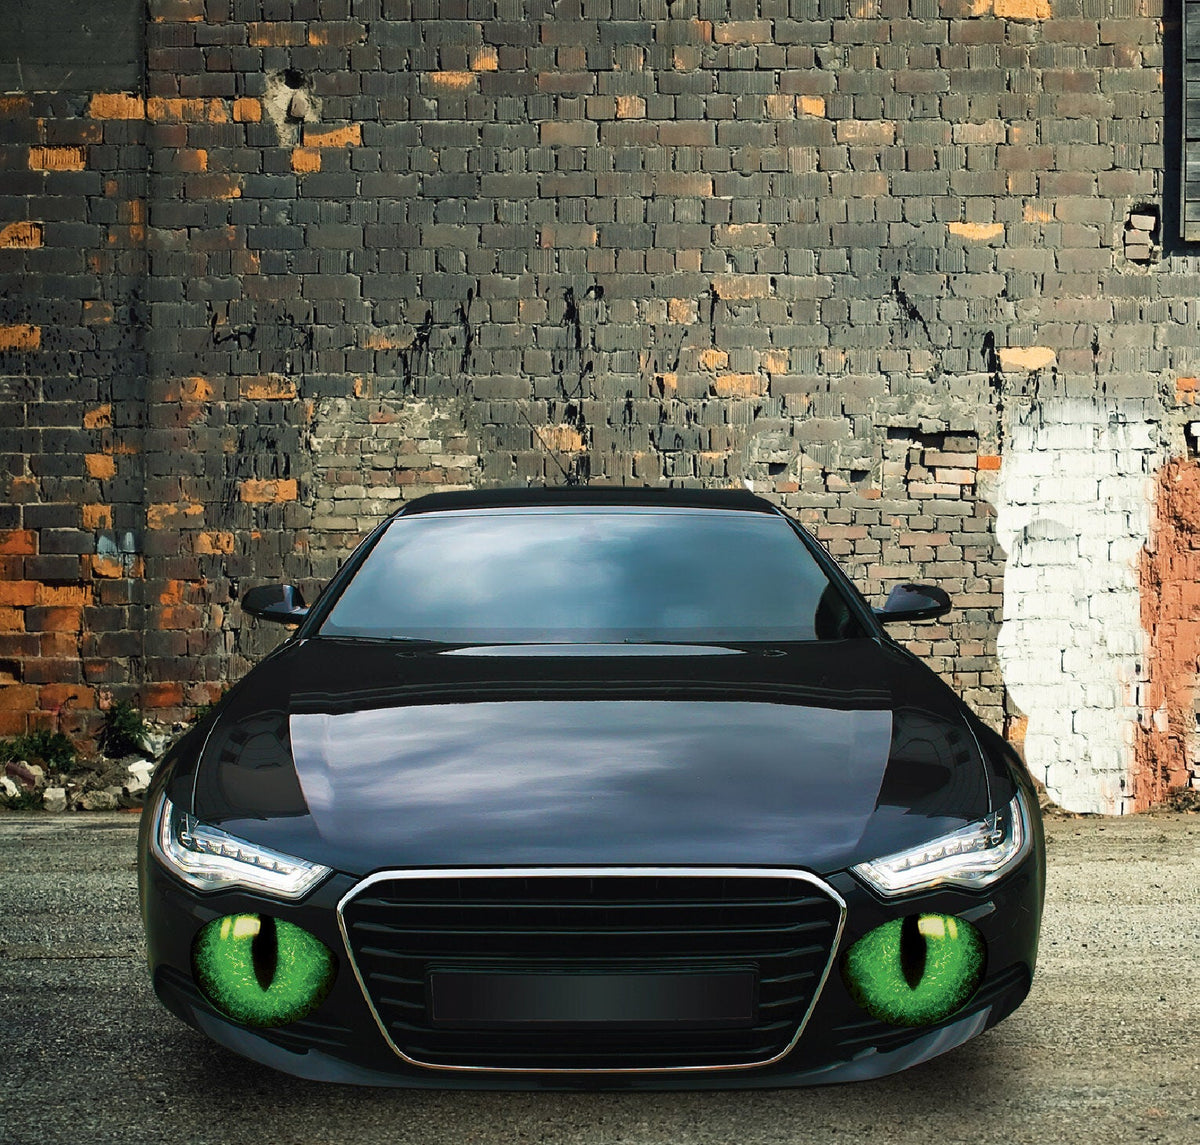 A black car with glowing green Cover-Alls cat eye decals in the grille, parked in front of a dark brick wall in a quiet neighborhood, with scattered white patches.